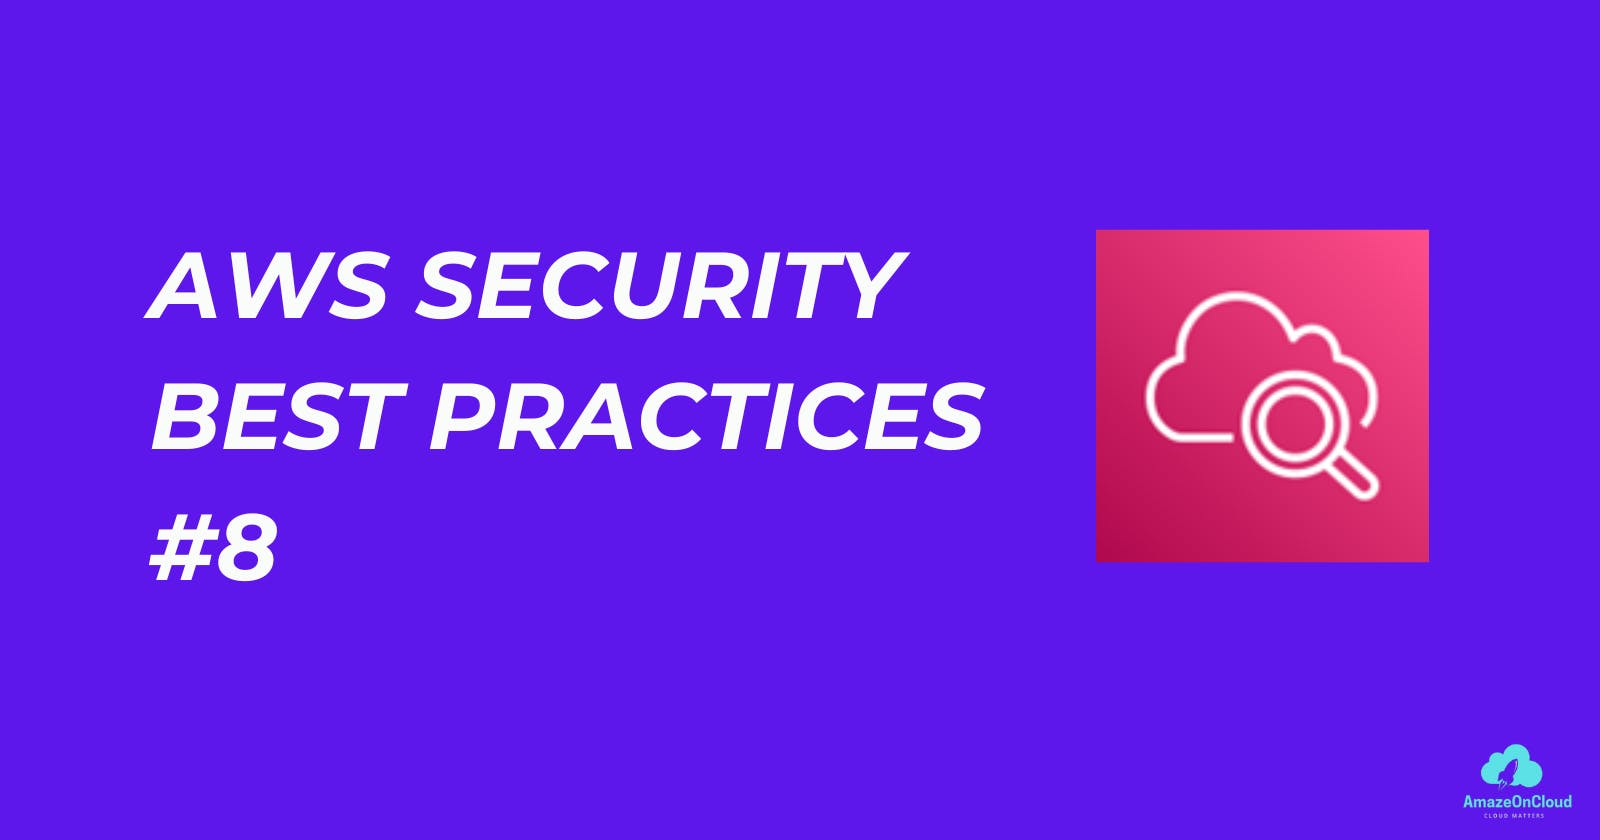 #8 AWS Security best practices